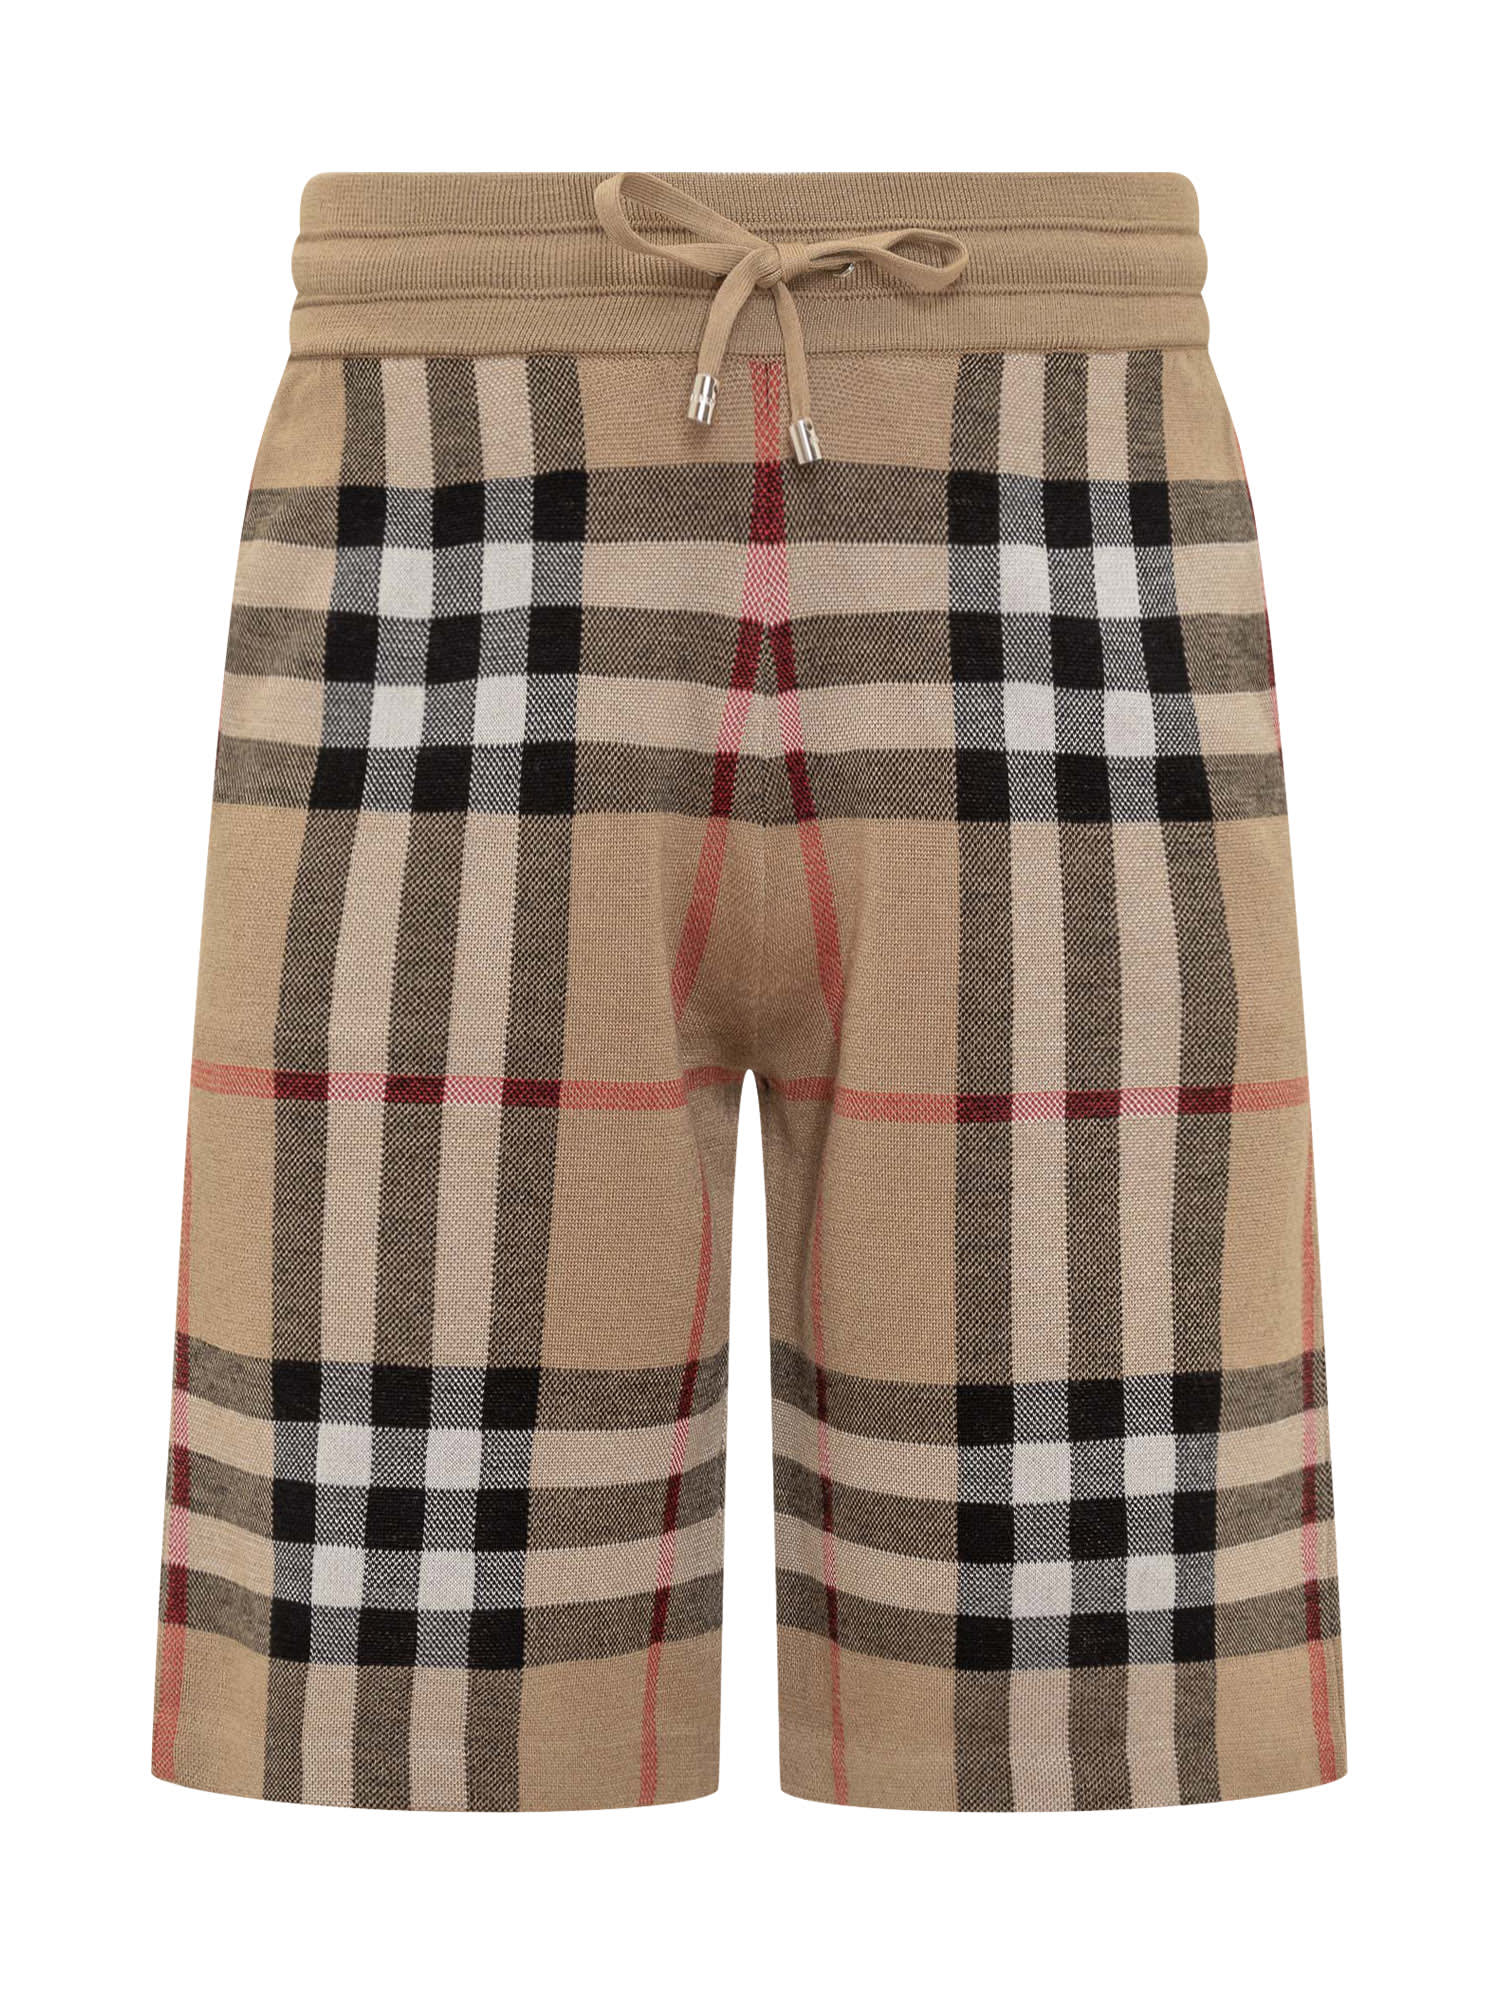 BURBERRY ICONIC CHECK SHORTS